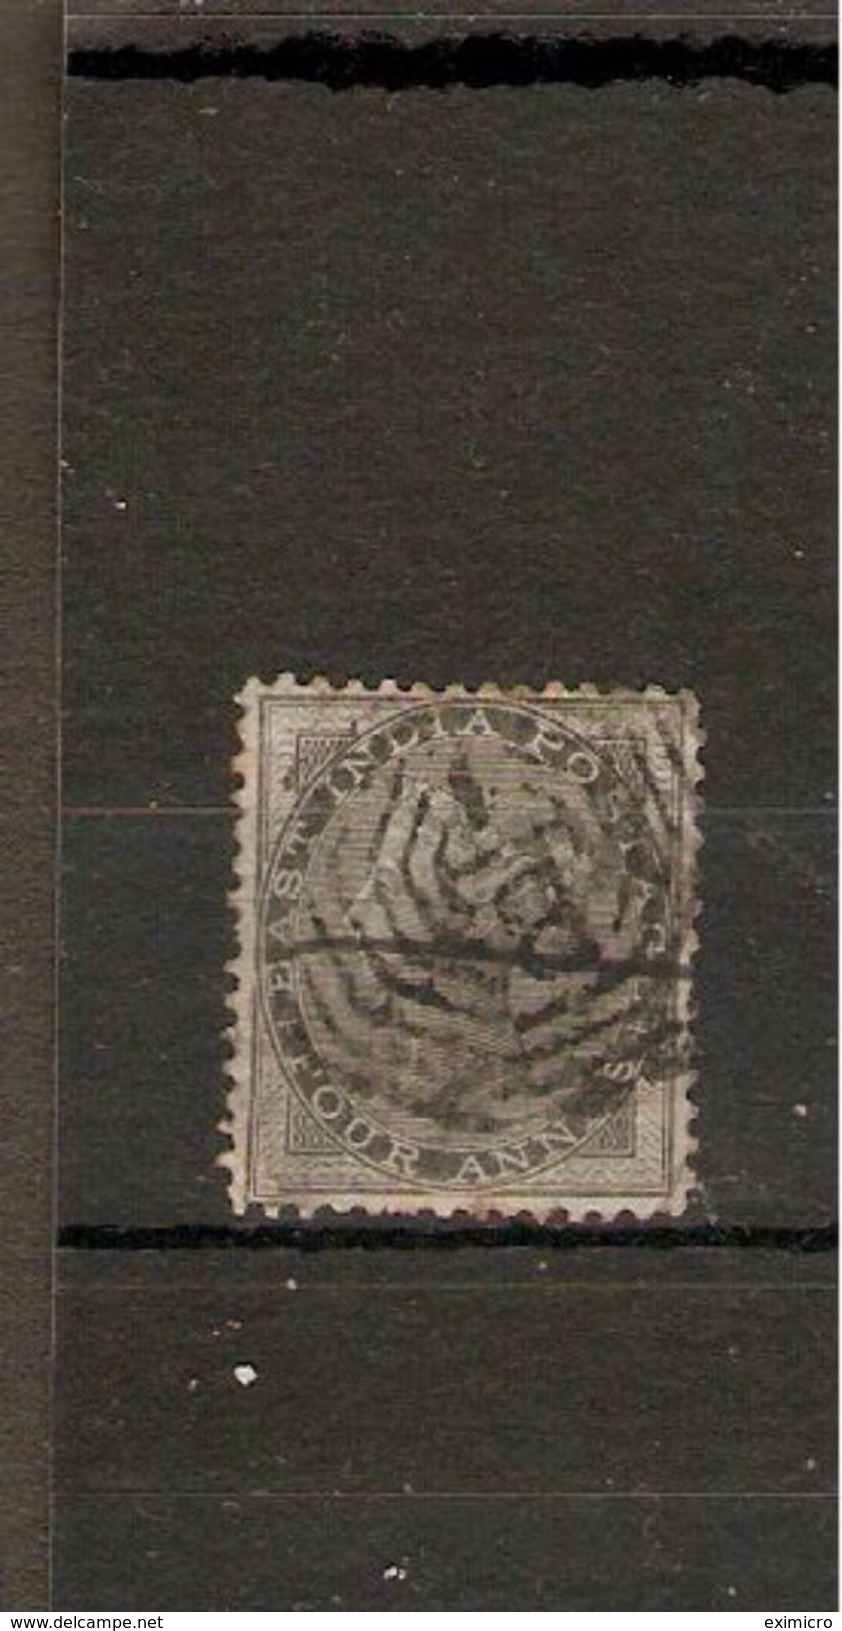 INDIA 1855 4a SG 35 NO WATERMARK FINE USED Cat £22 - 1854 Britse Indische Compagnie